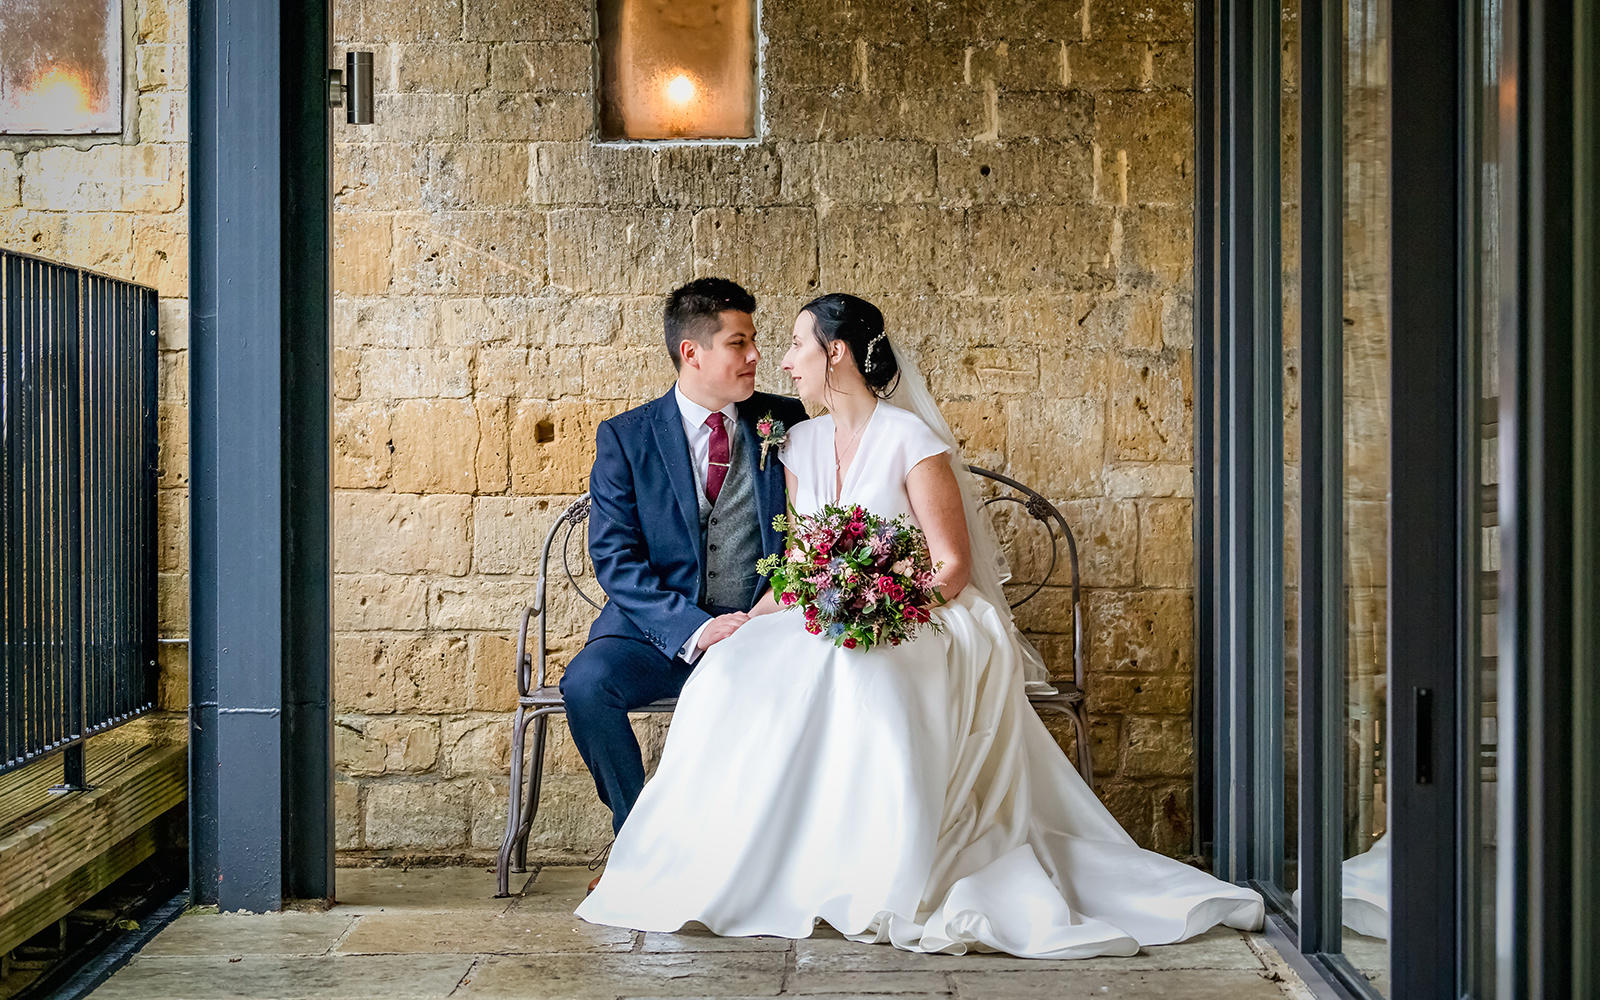 Capture Every Moment wedding photography duo from Cirencester reportage traditional photographers Lapstone Barn Chipping Campden Cotswolds venue Bride Groom